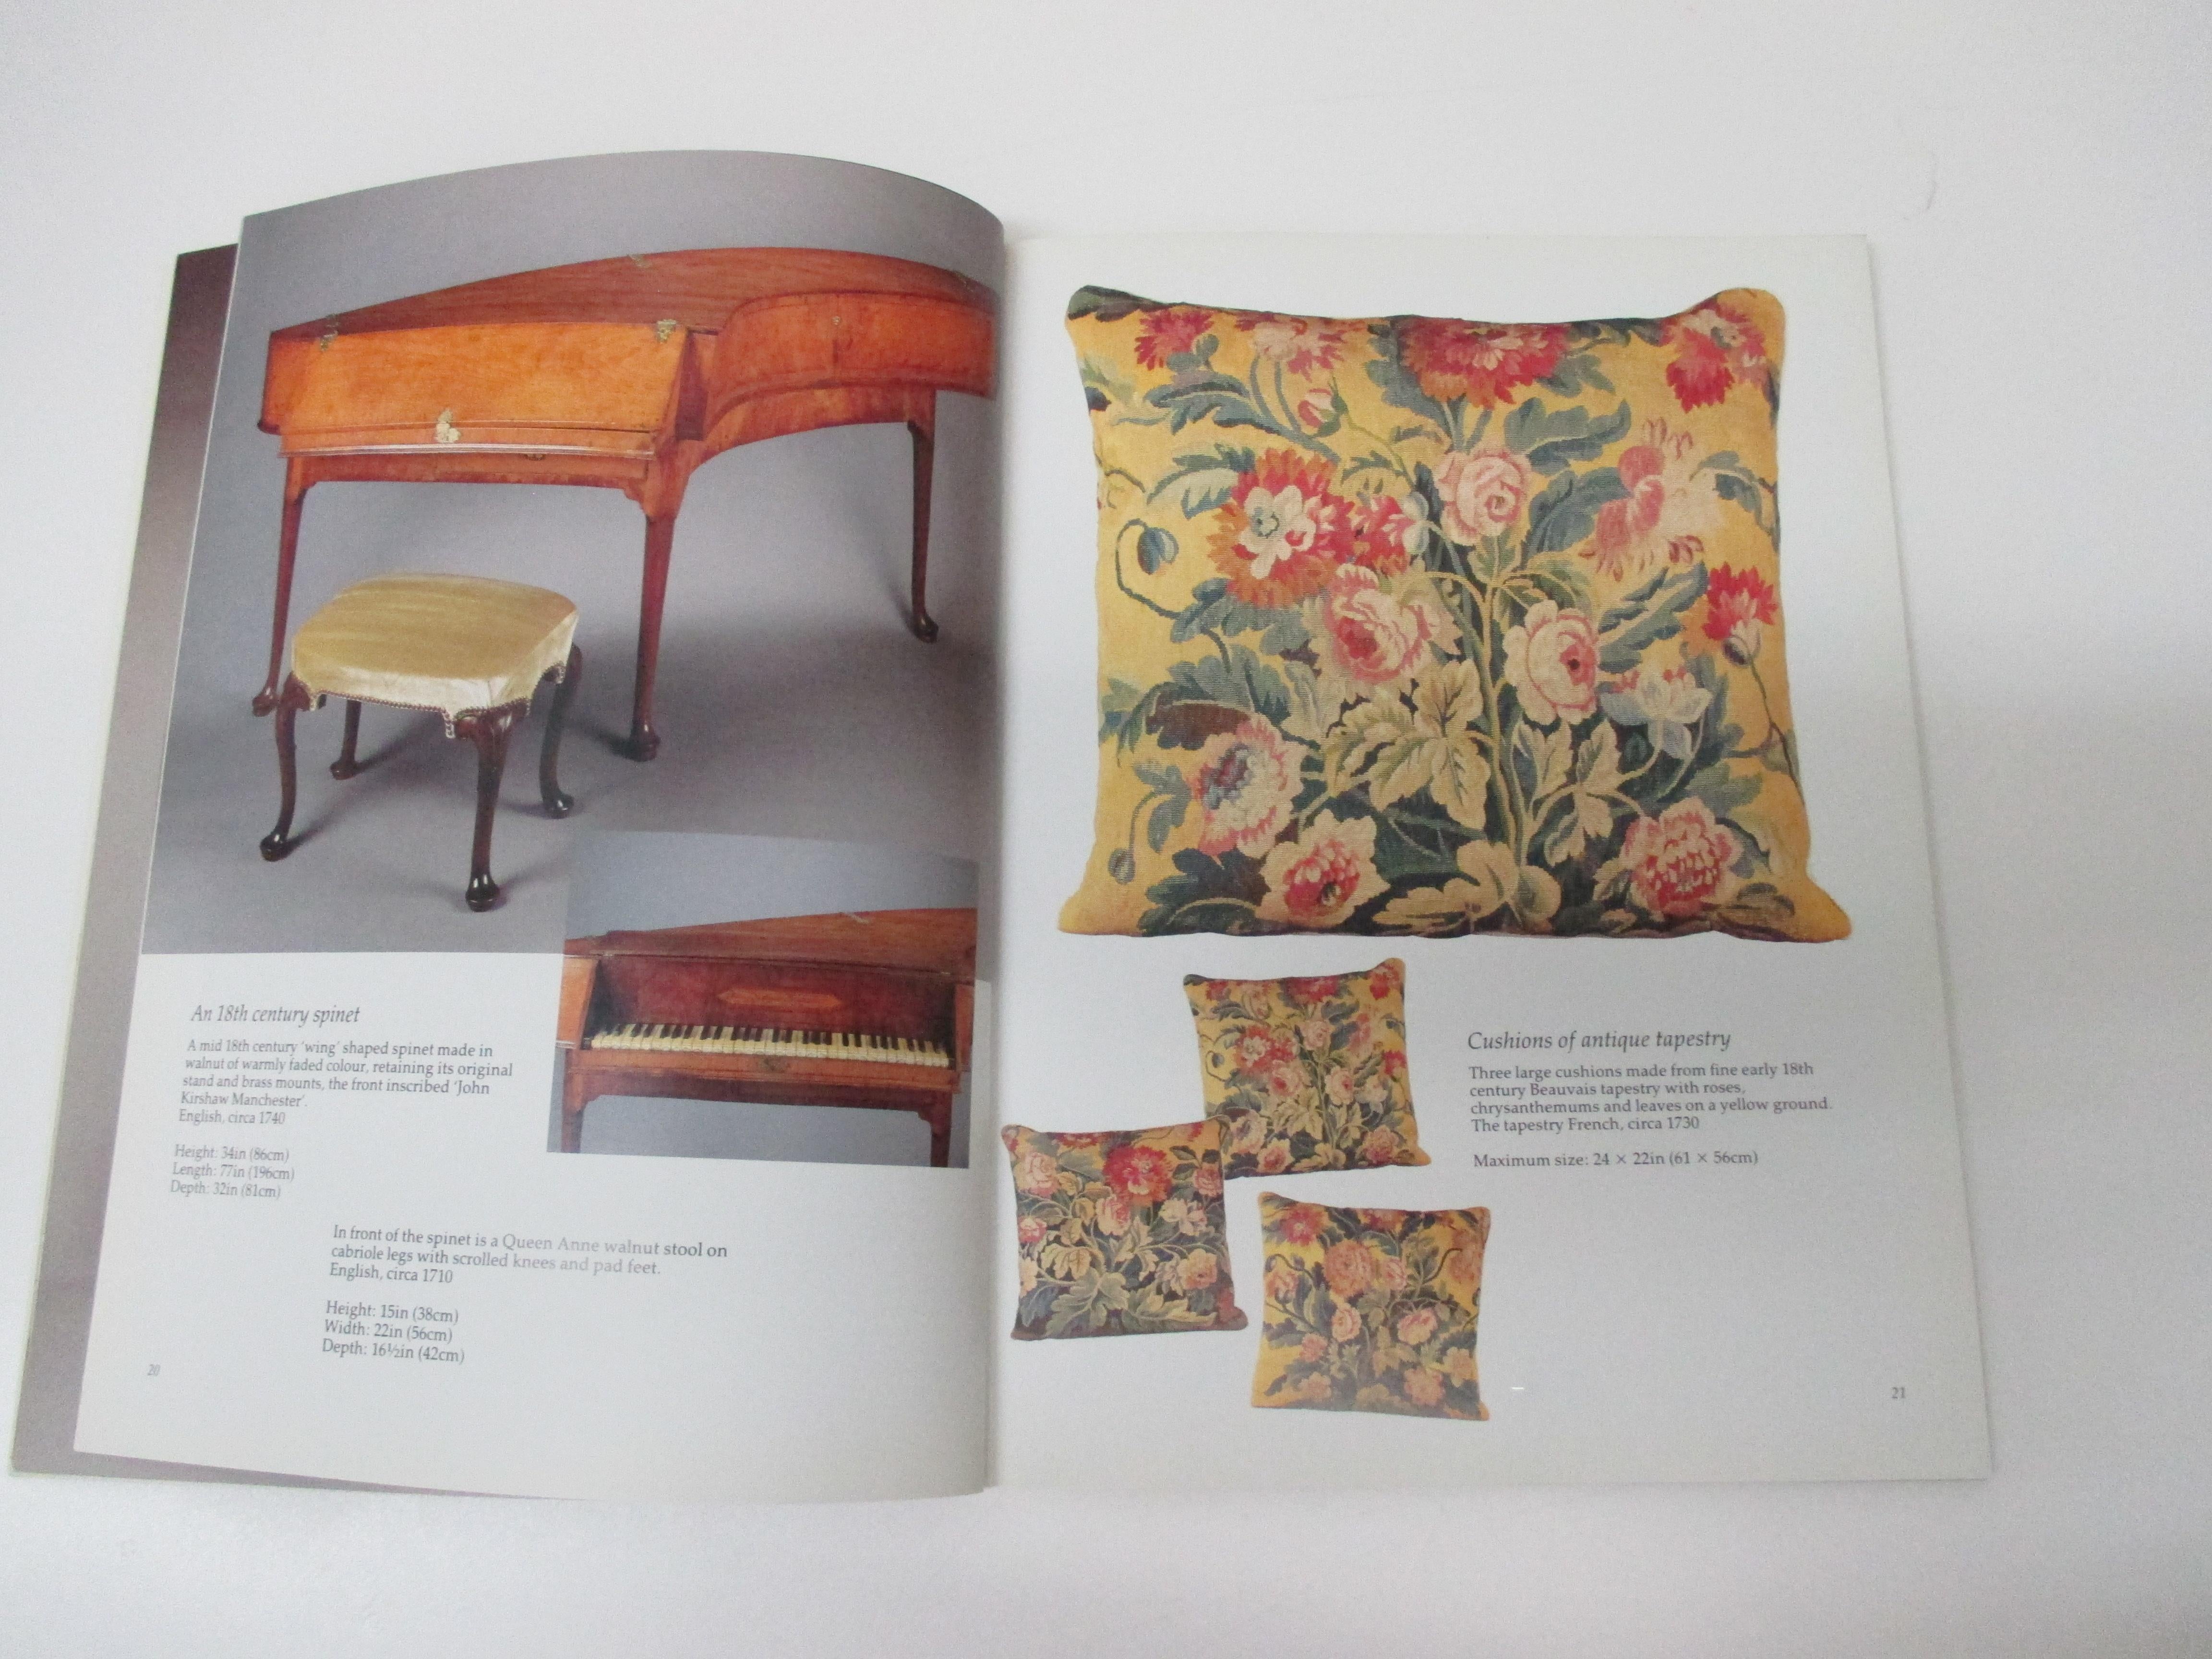 Mallet: English & Continental Antique Furniture and Objet's d'Art
Auction catalog by Mallet
Published in 1993
Pages: 80
Size: 0.5 x 8 x 11.